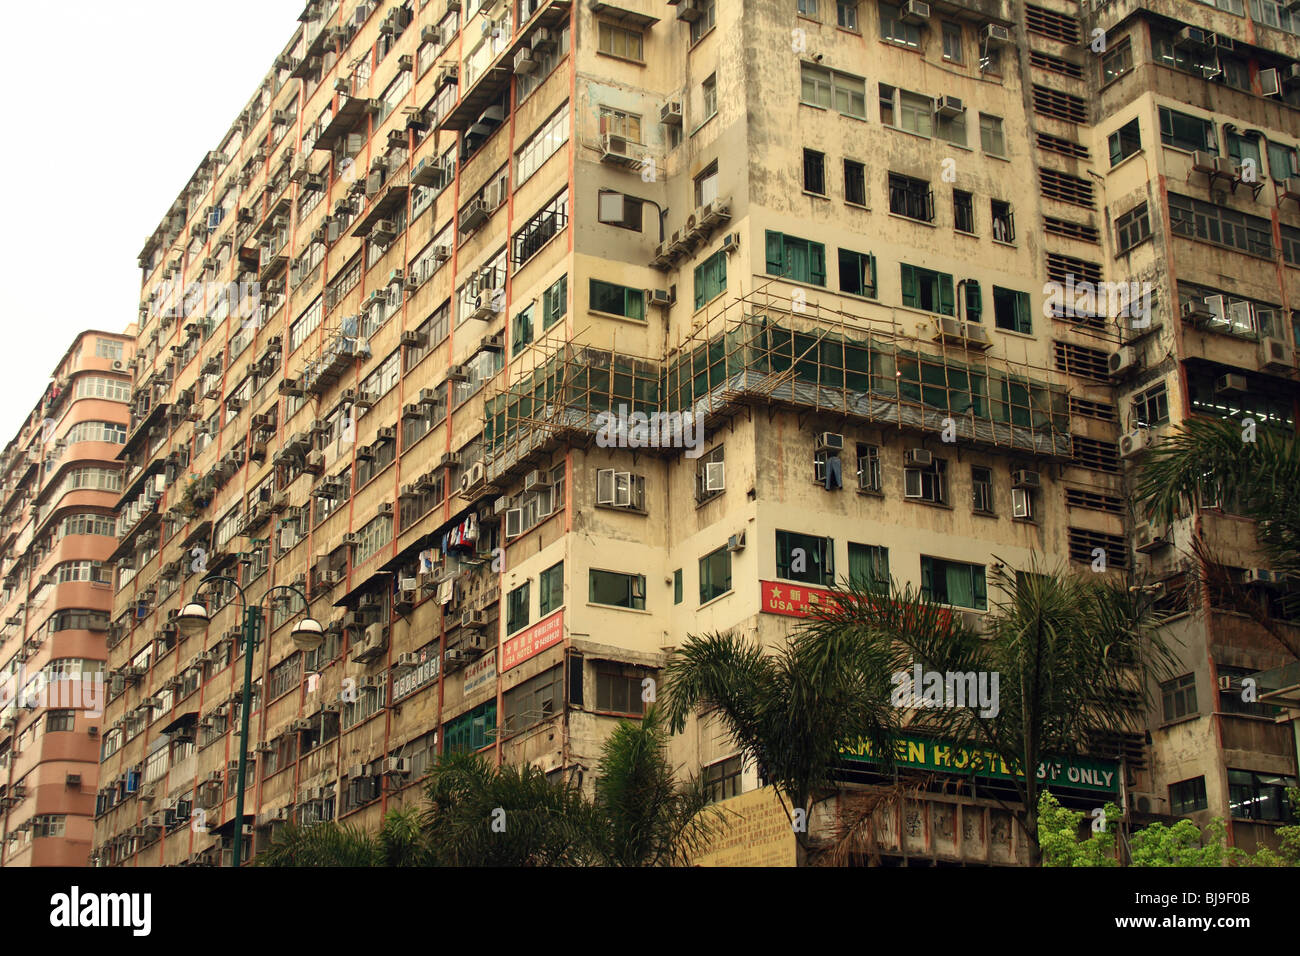 Small apartment buildings densely populated in Hong Kong downtown Chinese neighborhood Stock Photo